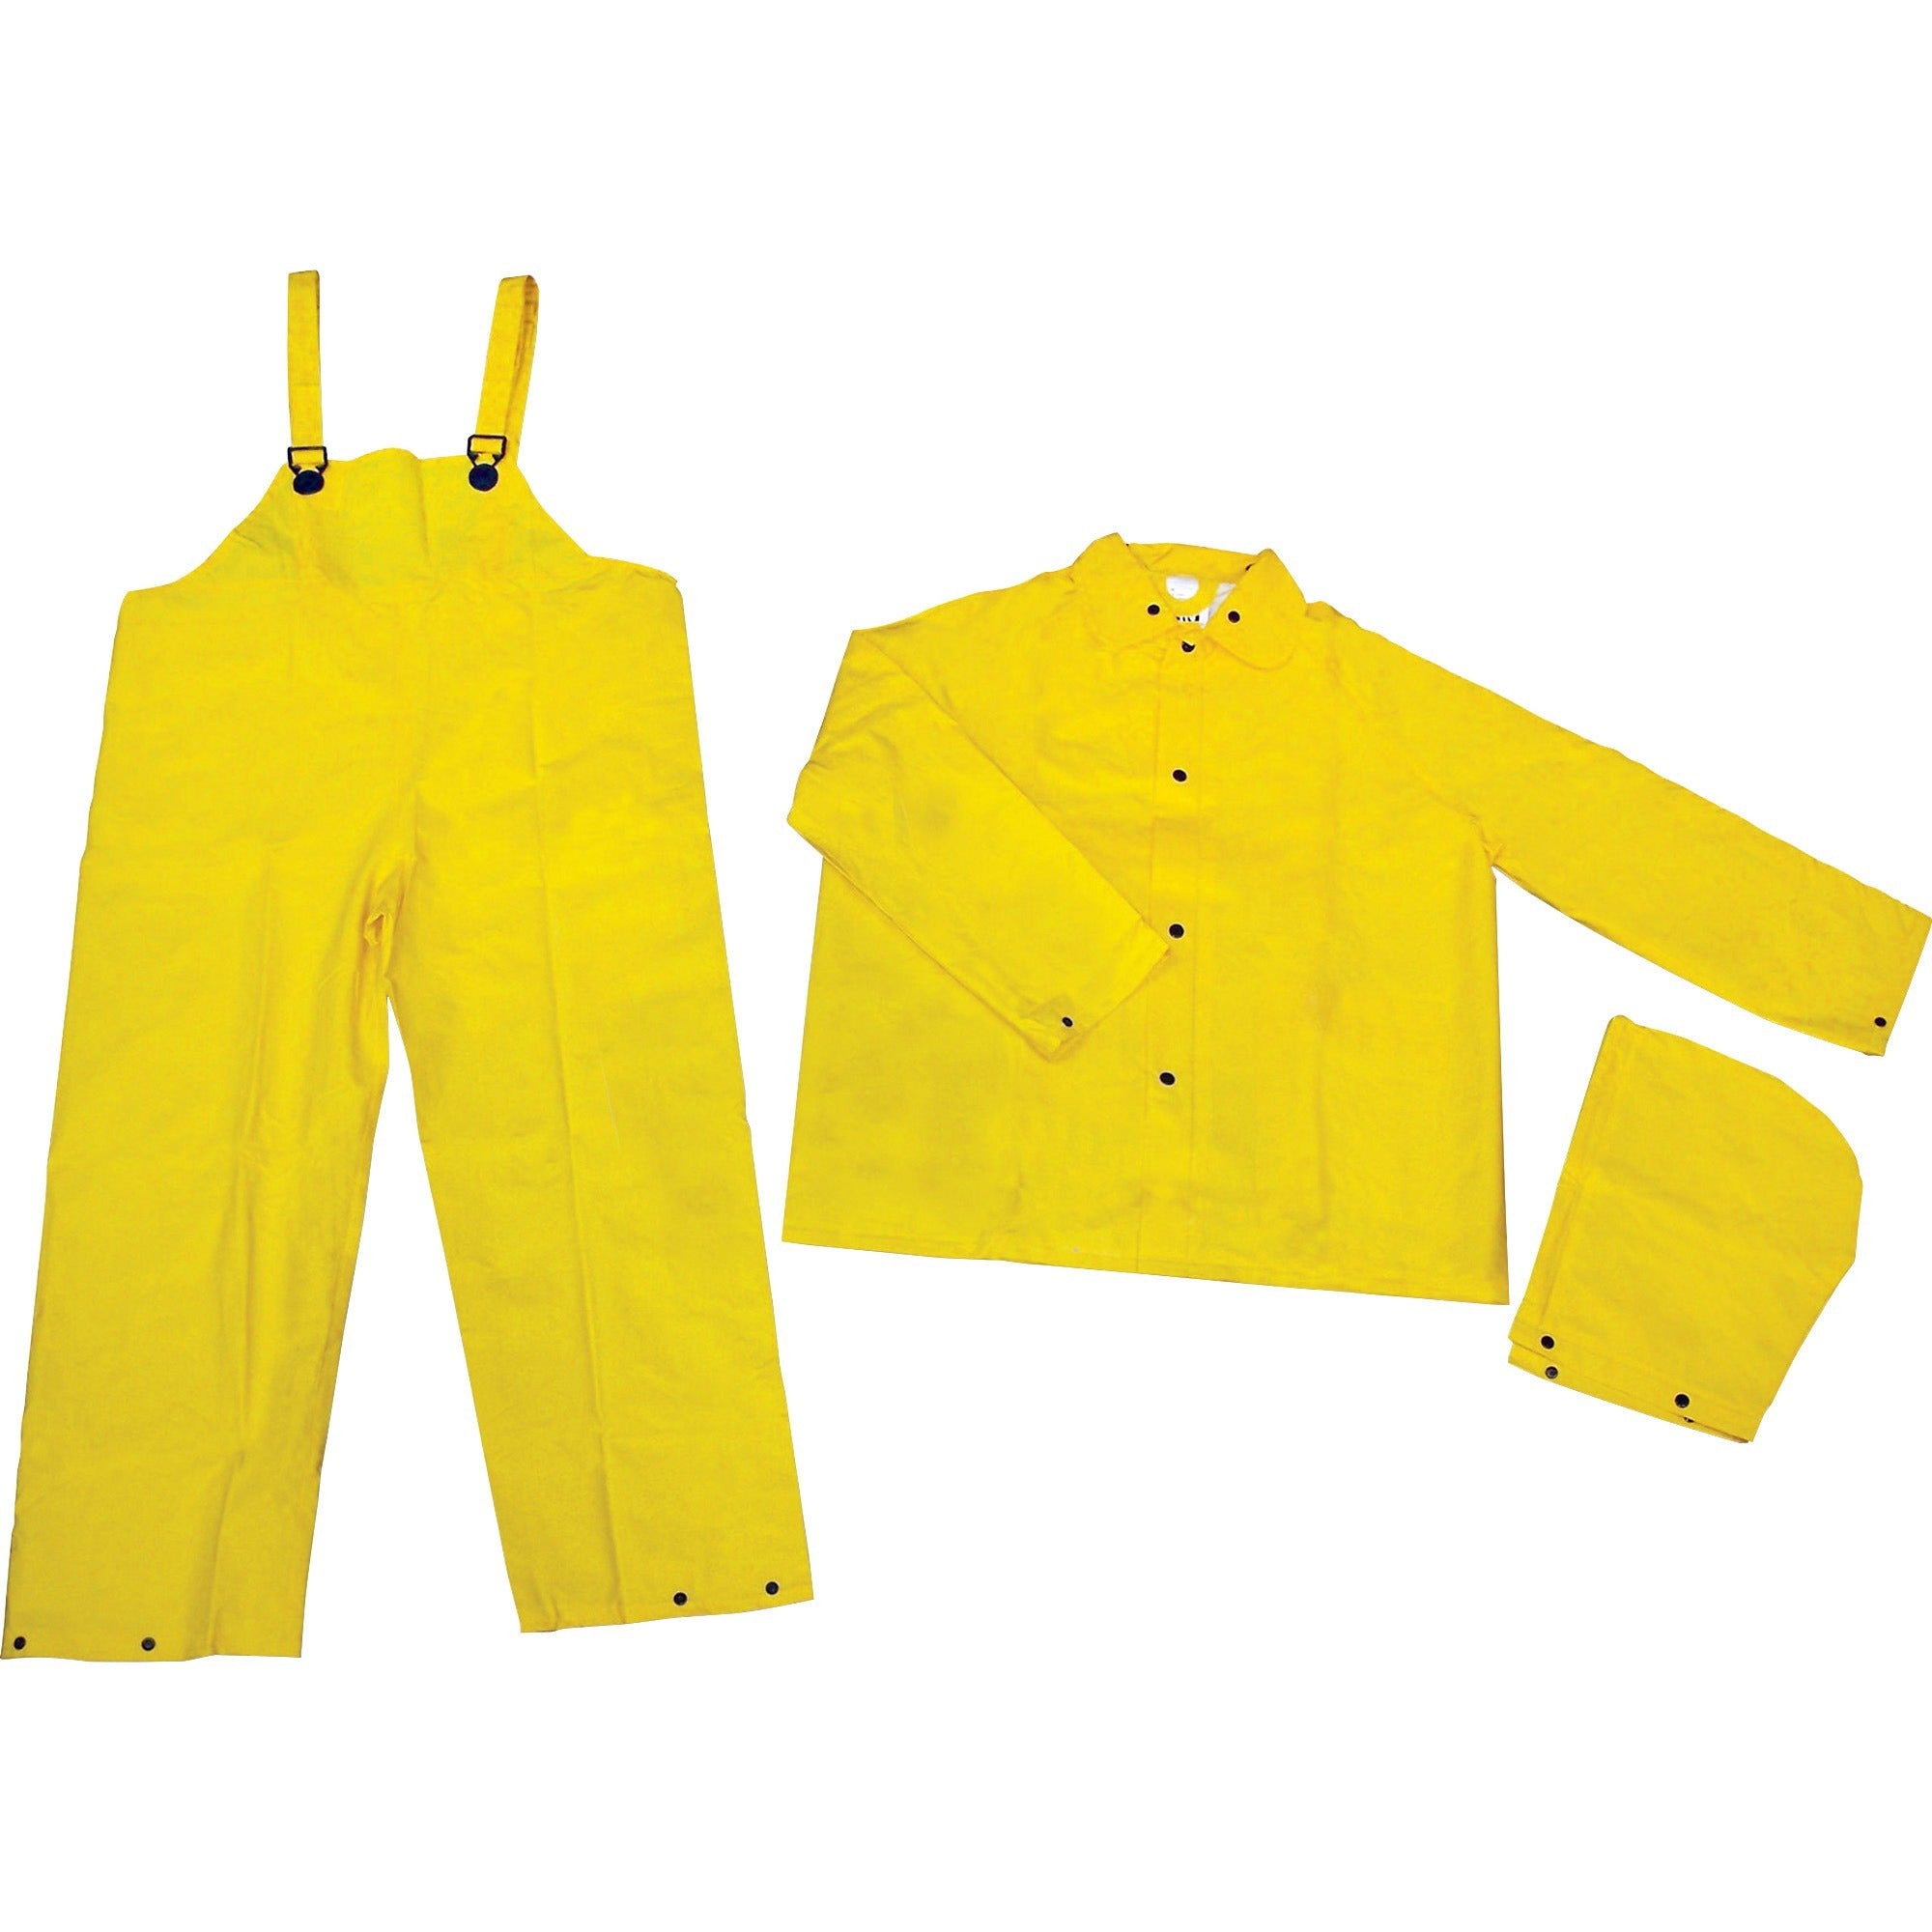 river-city-three-piece-rainsuit-recommended-for-agriculture-construction-transportation-sanitation-carpentry-landscaping-4-xtra-large-size-water-protection-snap-closure-polyester-polyvinyl-chloride-pvc-yellow-1-each_mcs2003x4 - 1